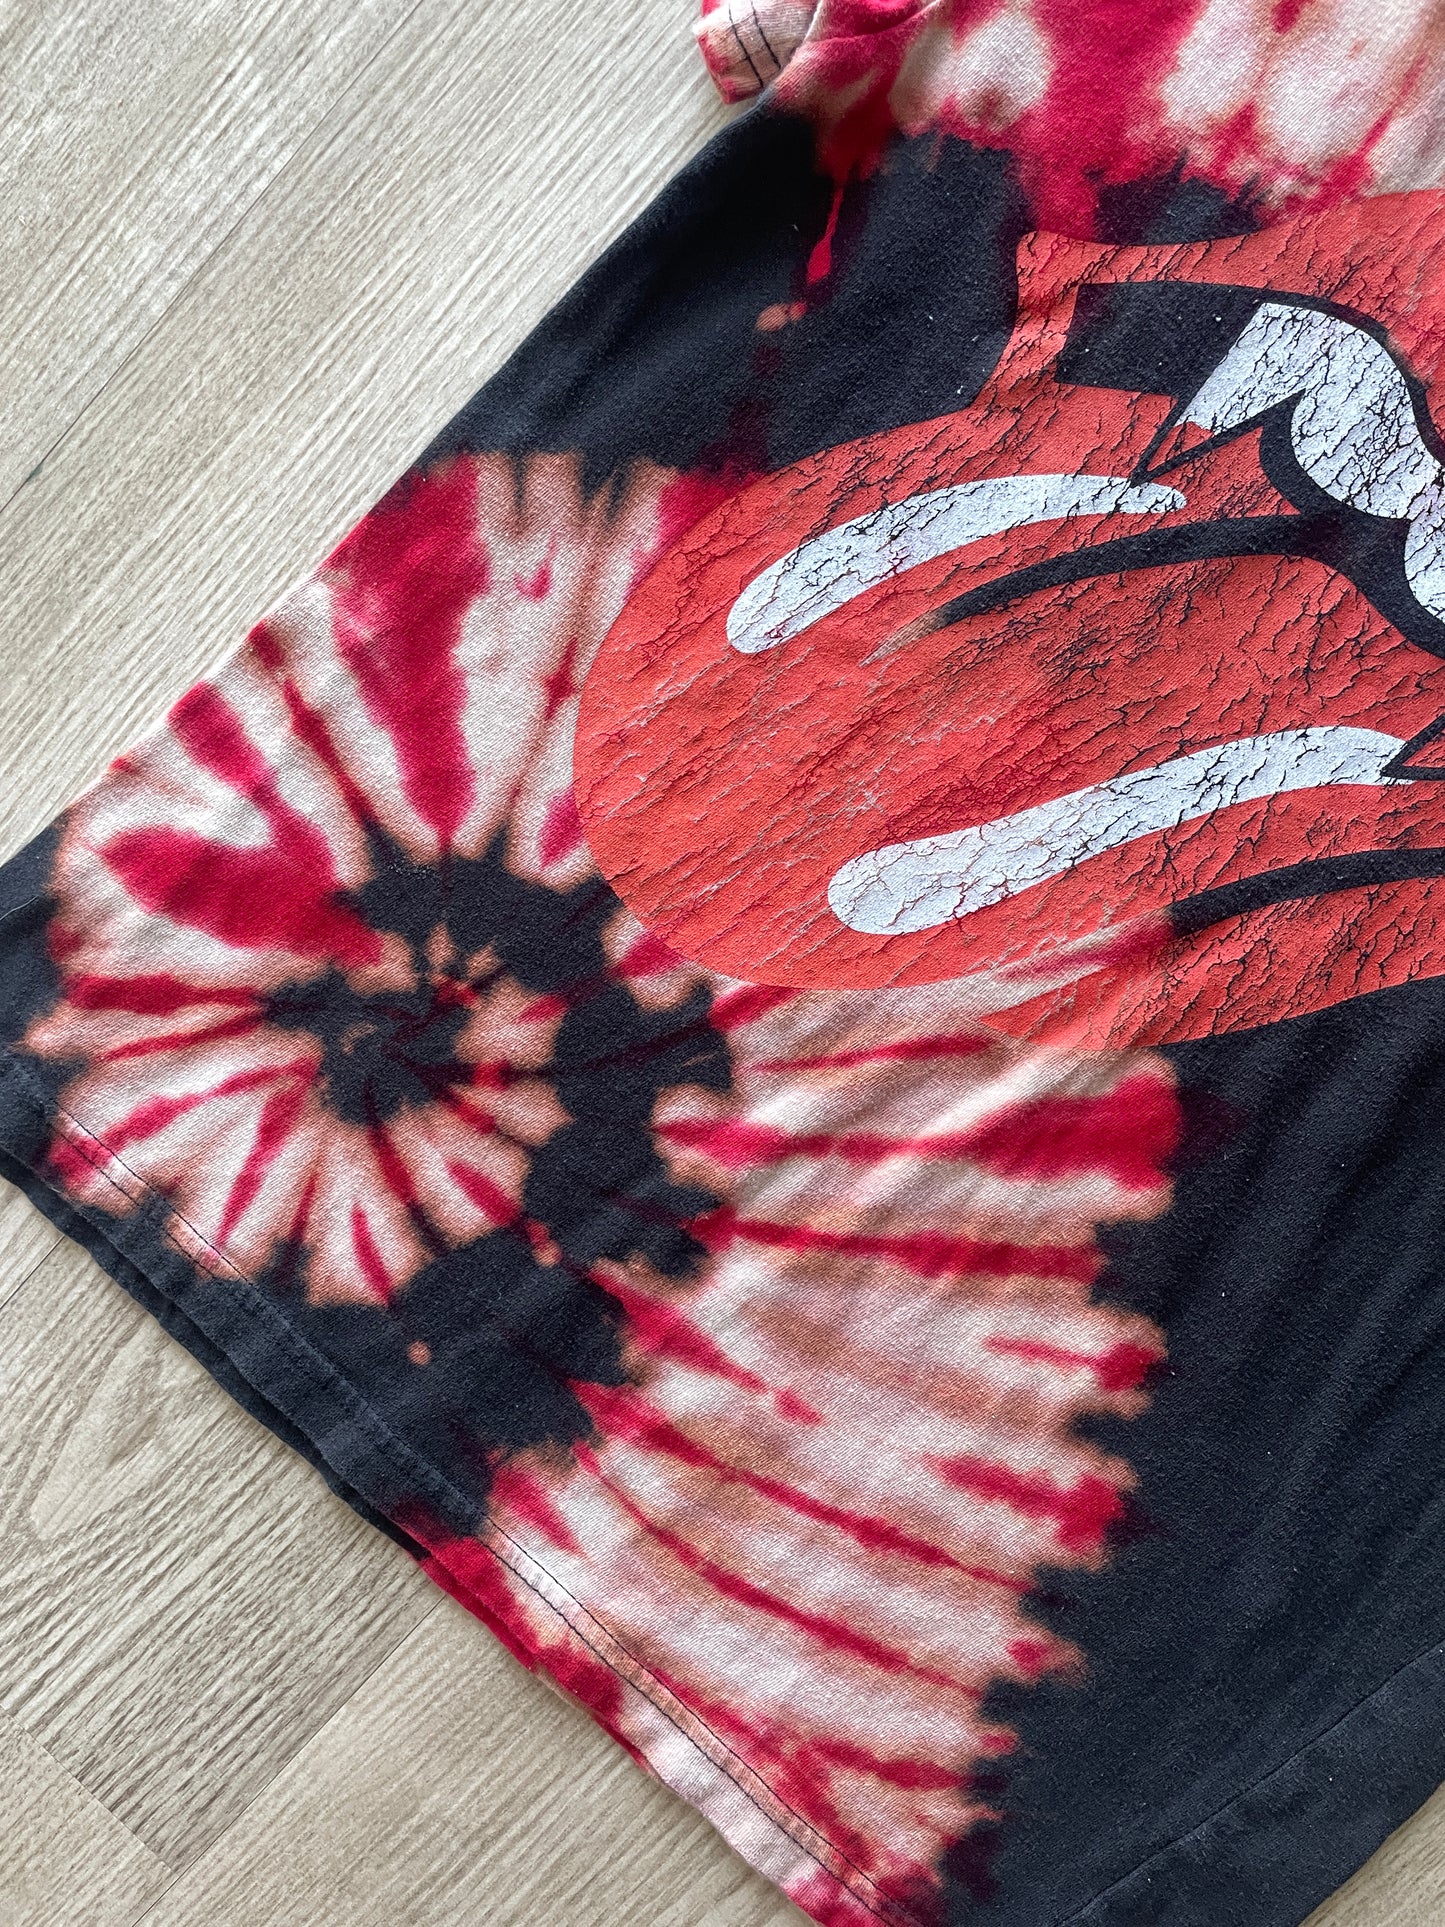 MEDIUM Women's Rolling Stones Hot Lips Handmade Reverse Tie Dye Short Sleeve T-Shirt | One-Of-a-Kind Upcycled Red and Black Spiral Top